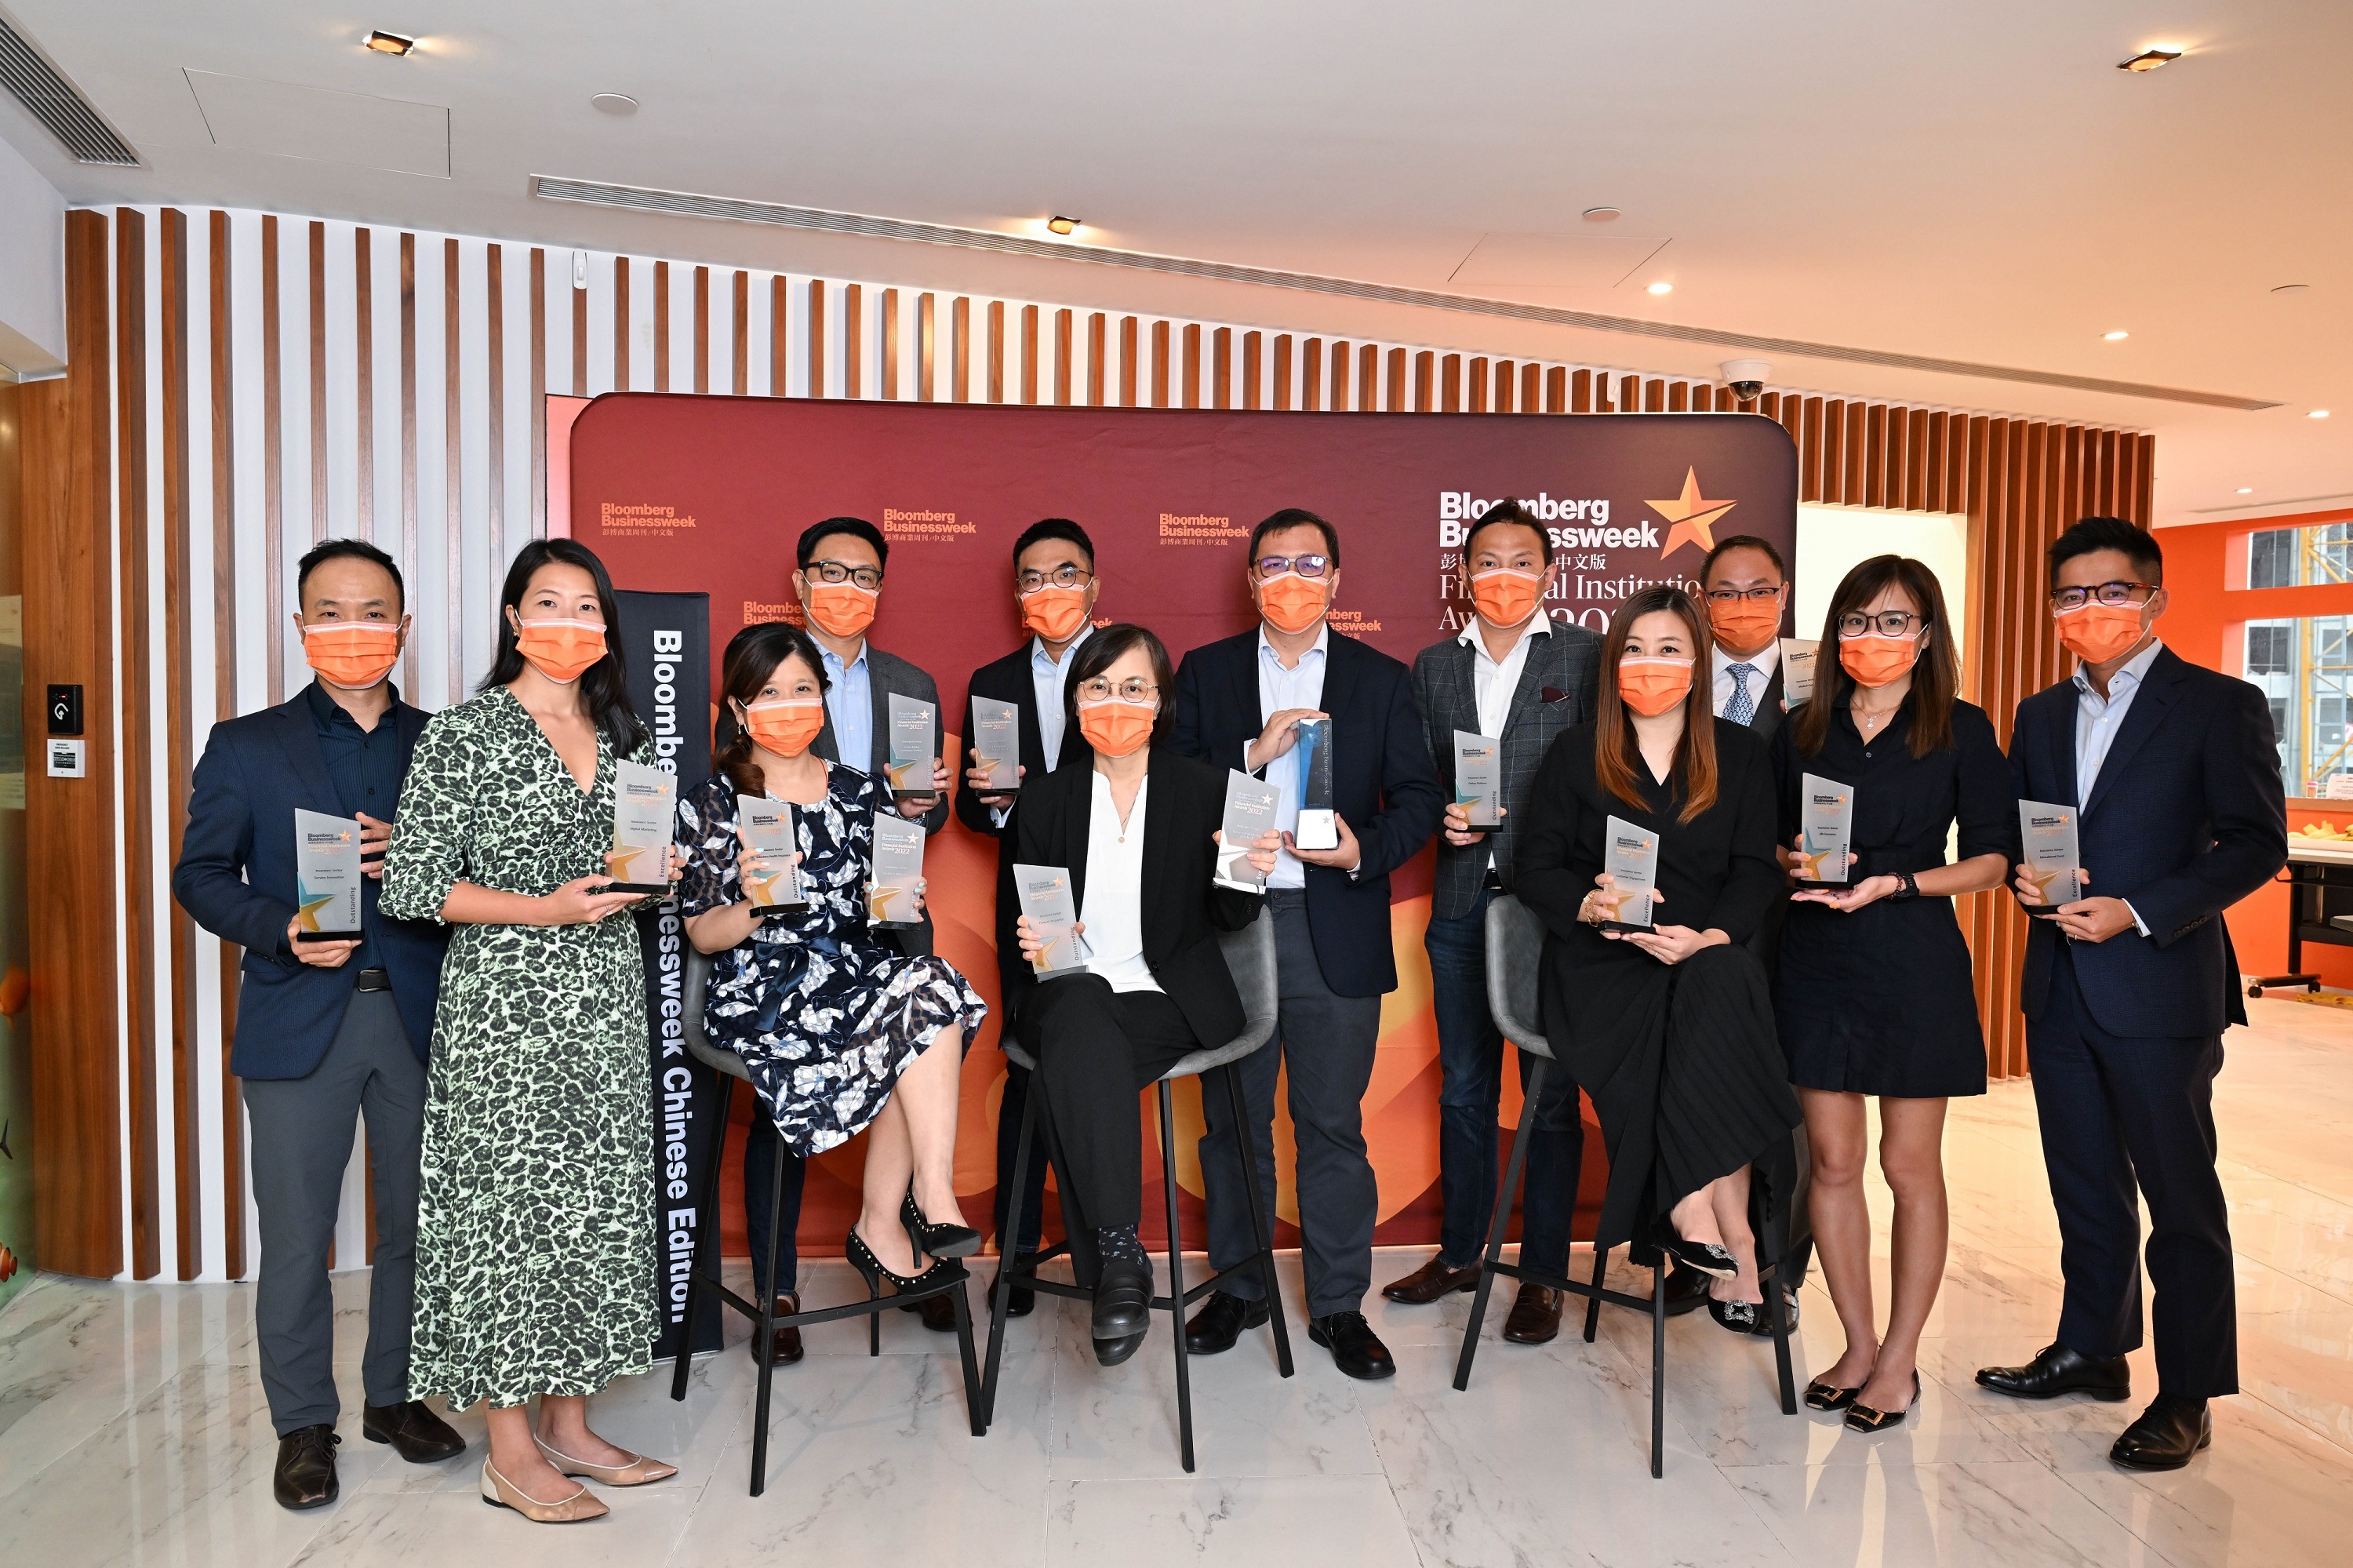 FWD has broken its record again at Bloomberg Businessweek Financial Institution Awards 2022 with 14 wins. Crowned the most awarded insurer for the fifth consecutive year, FWD has been recognised with its innovative products, services, platforms and outstanding marketing strategies.